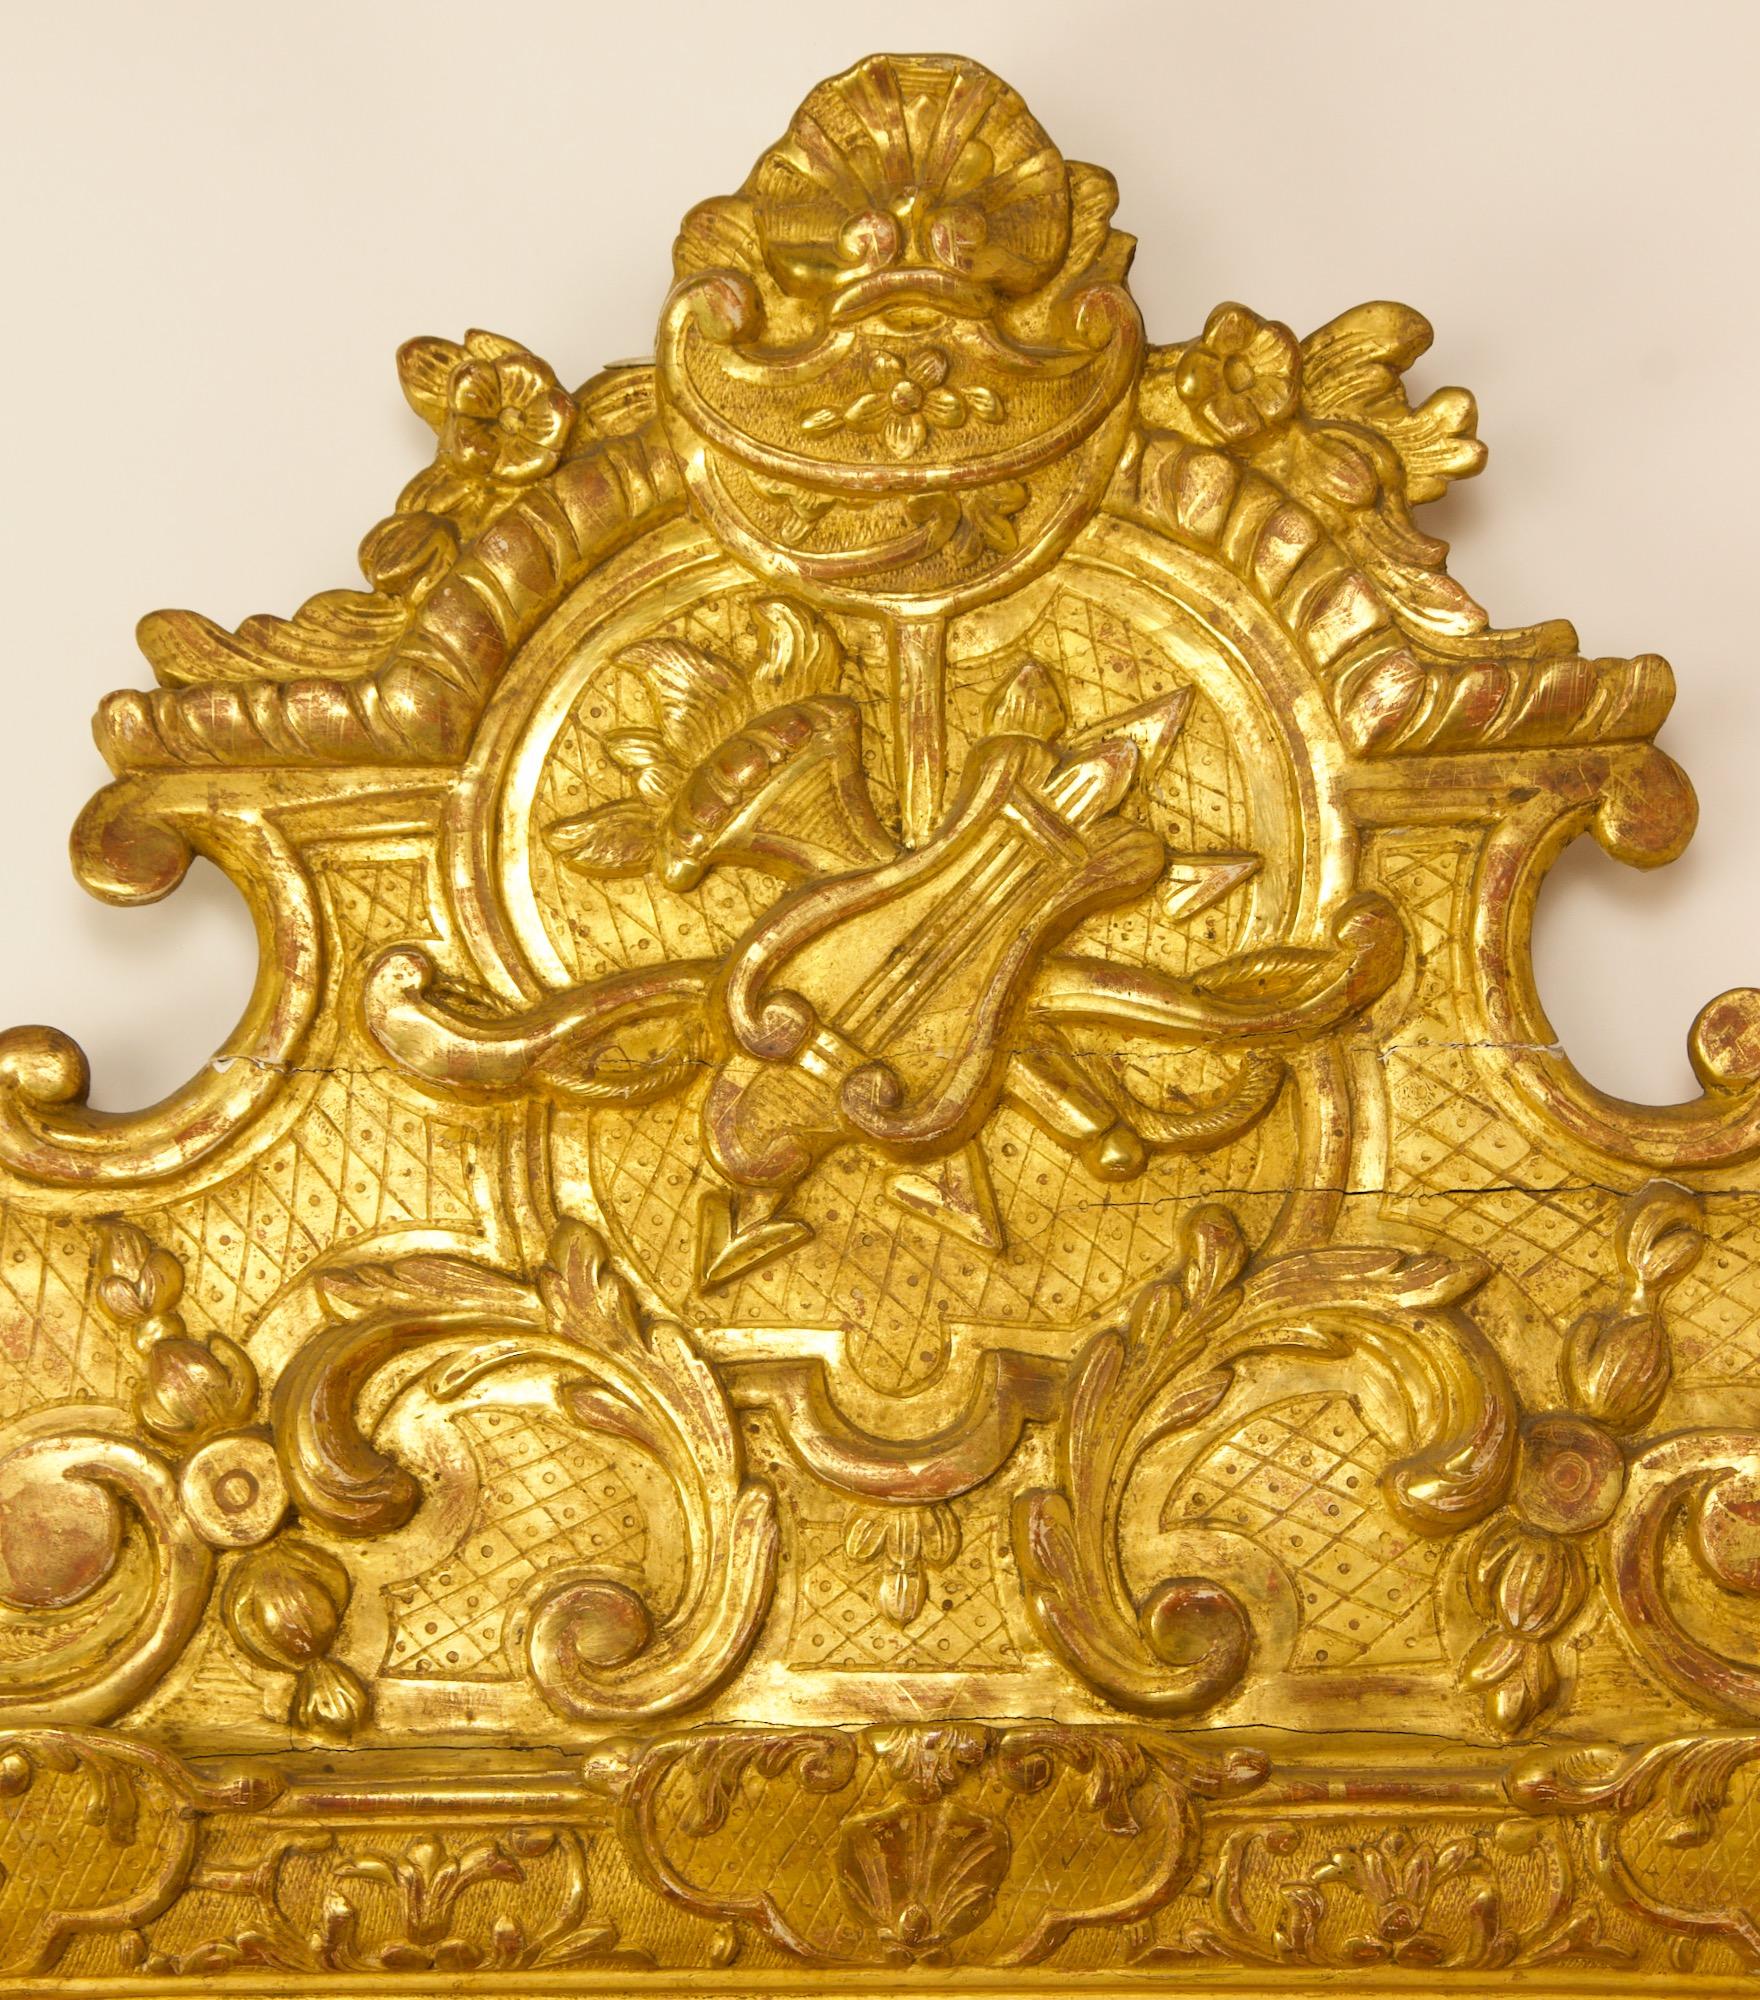 Early 18th century French regence love symbol giltwood mirror.

An early 18th century Regence giltwood mirror with a rectangular plate (17.72 in. x 13.38 in.) within a conforming frame adorned with a carved ionic egg-and-dart border and interlaced